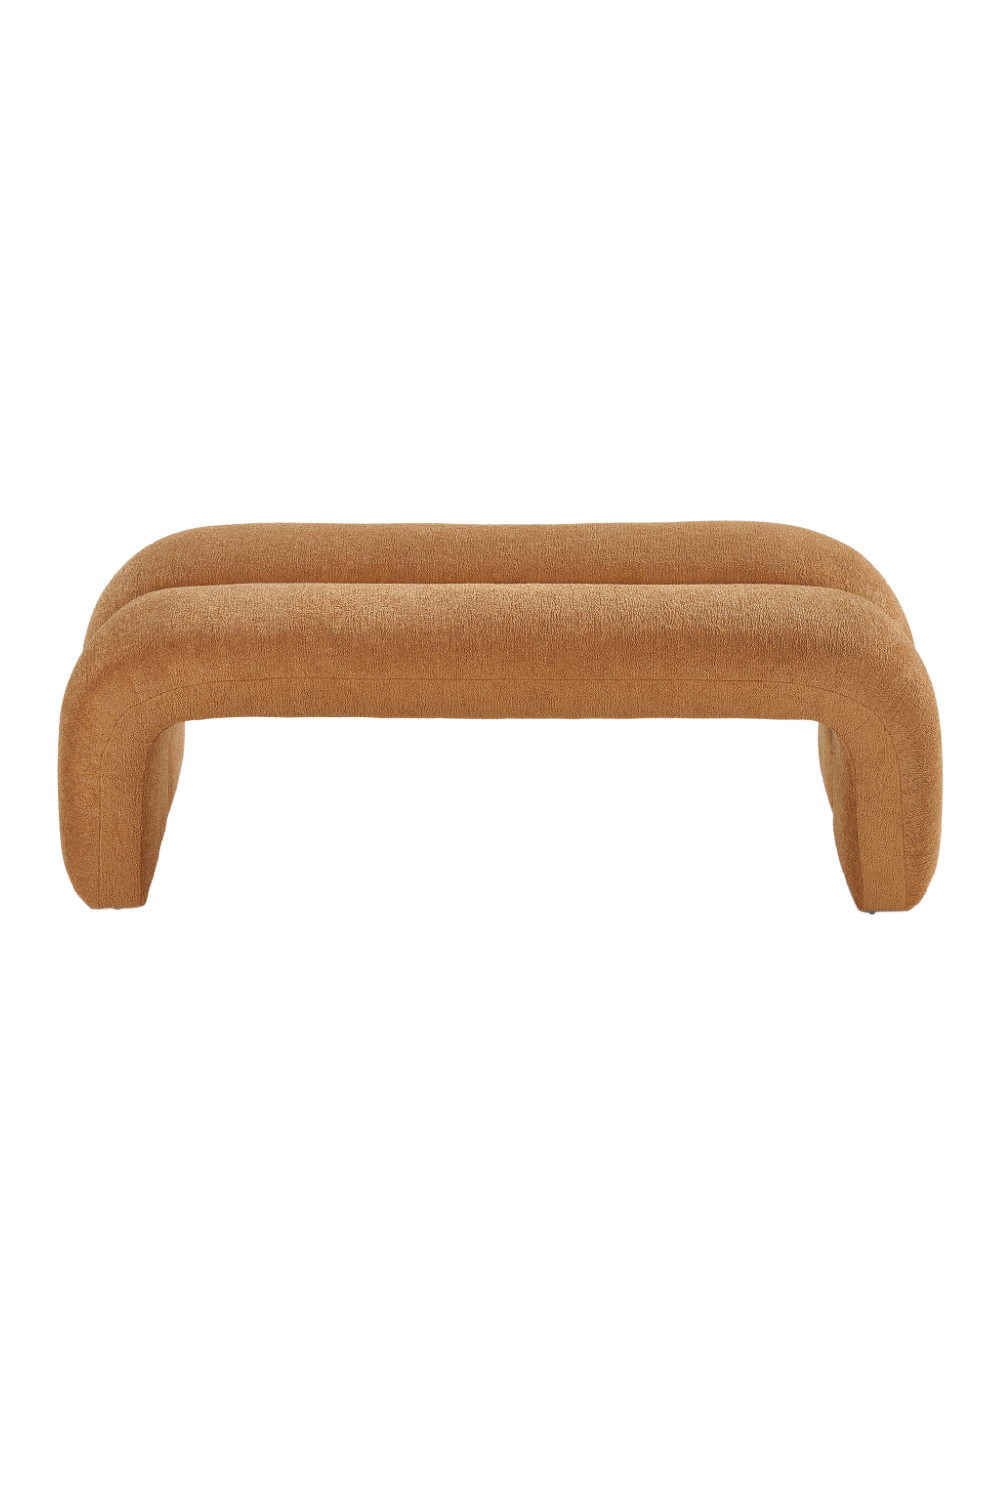 Upholstered Curved Bench | Liang & Eimil Piper | Oroa.com